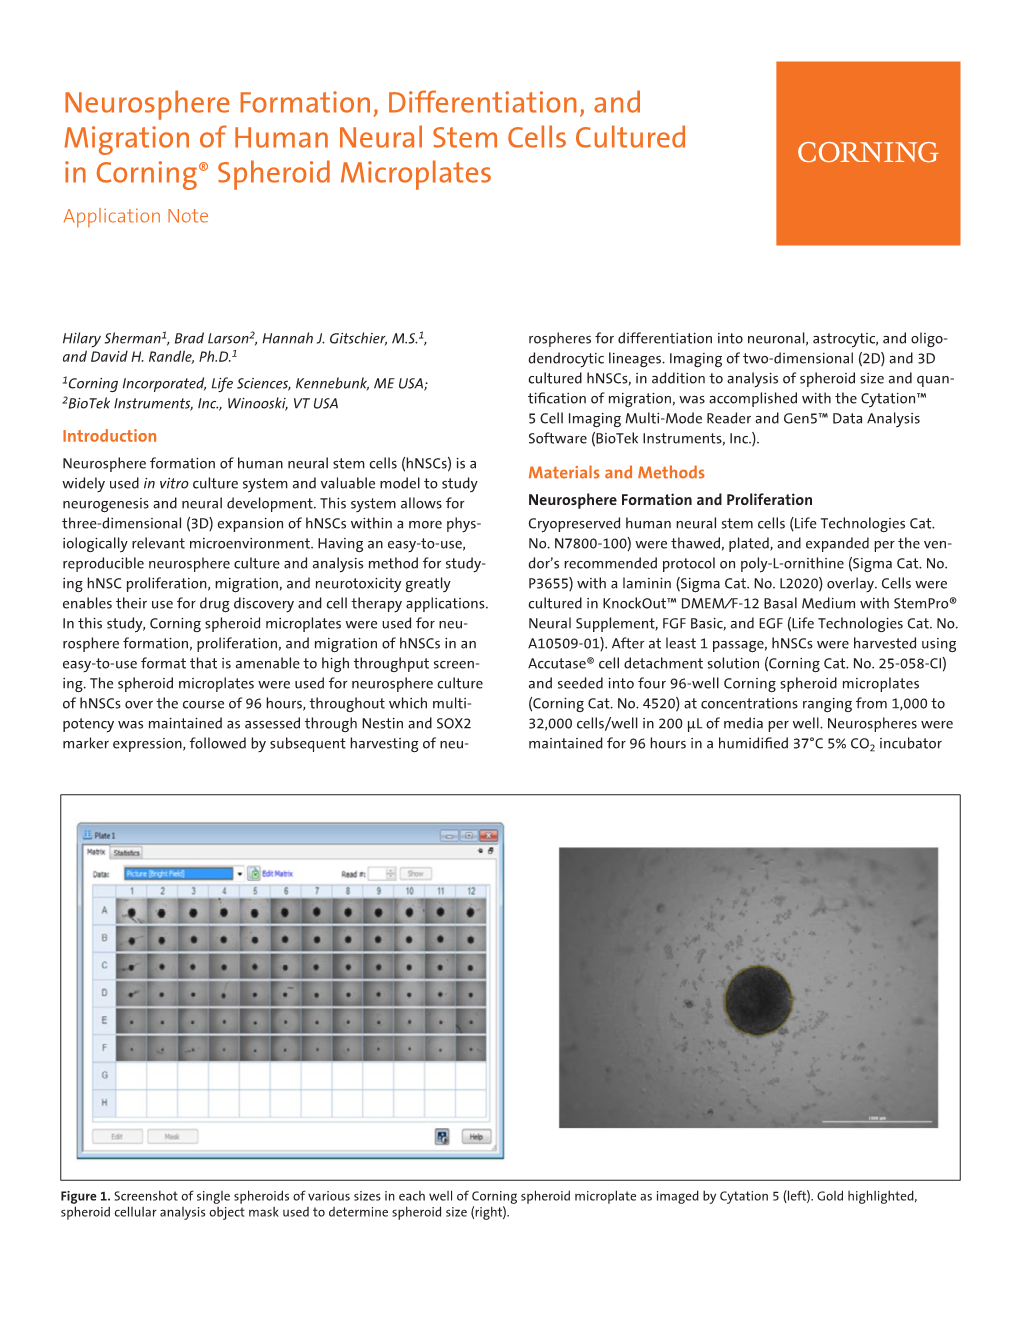 Neurosphere Formation, Differentiation, and Migration of Human Neural Stem Cells Cultured in Corning® Spheroid Microplates Application Note